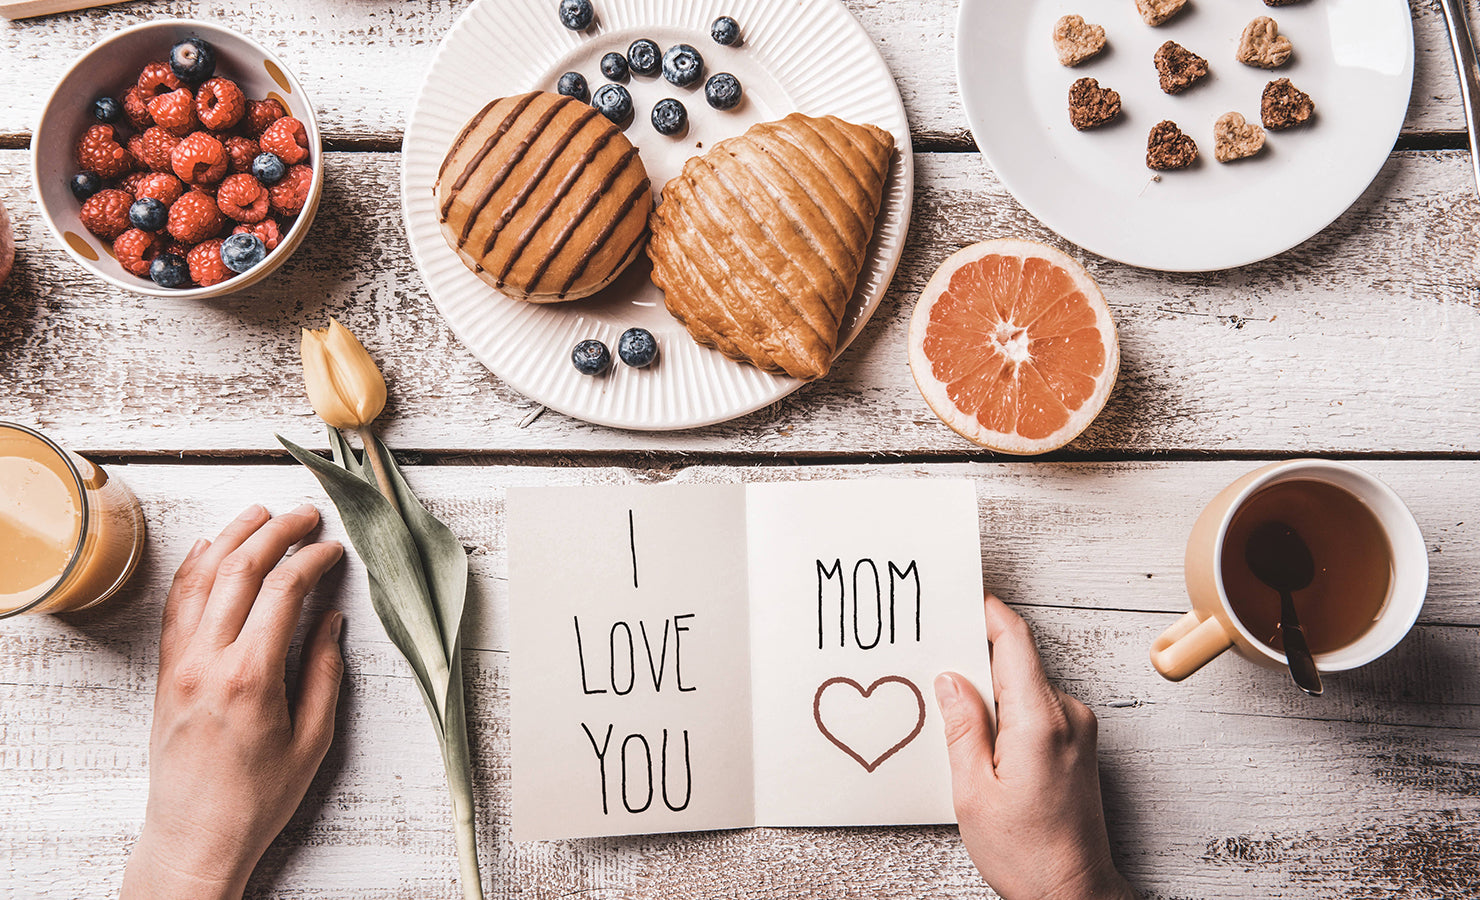 The Ultimate Mother’s Day Gifts To Say “I Love You” To Darling Mom